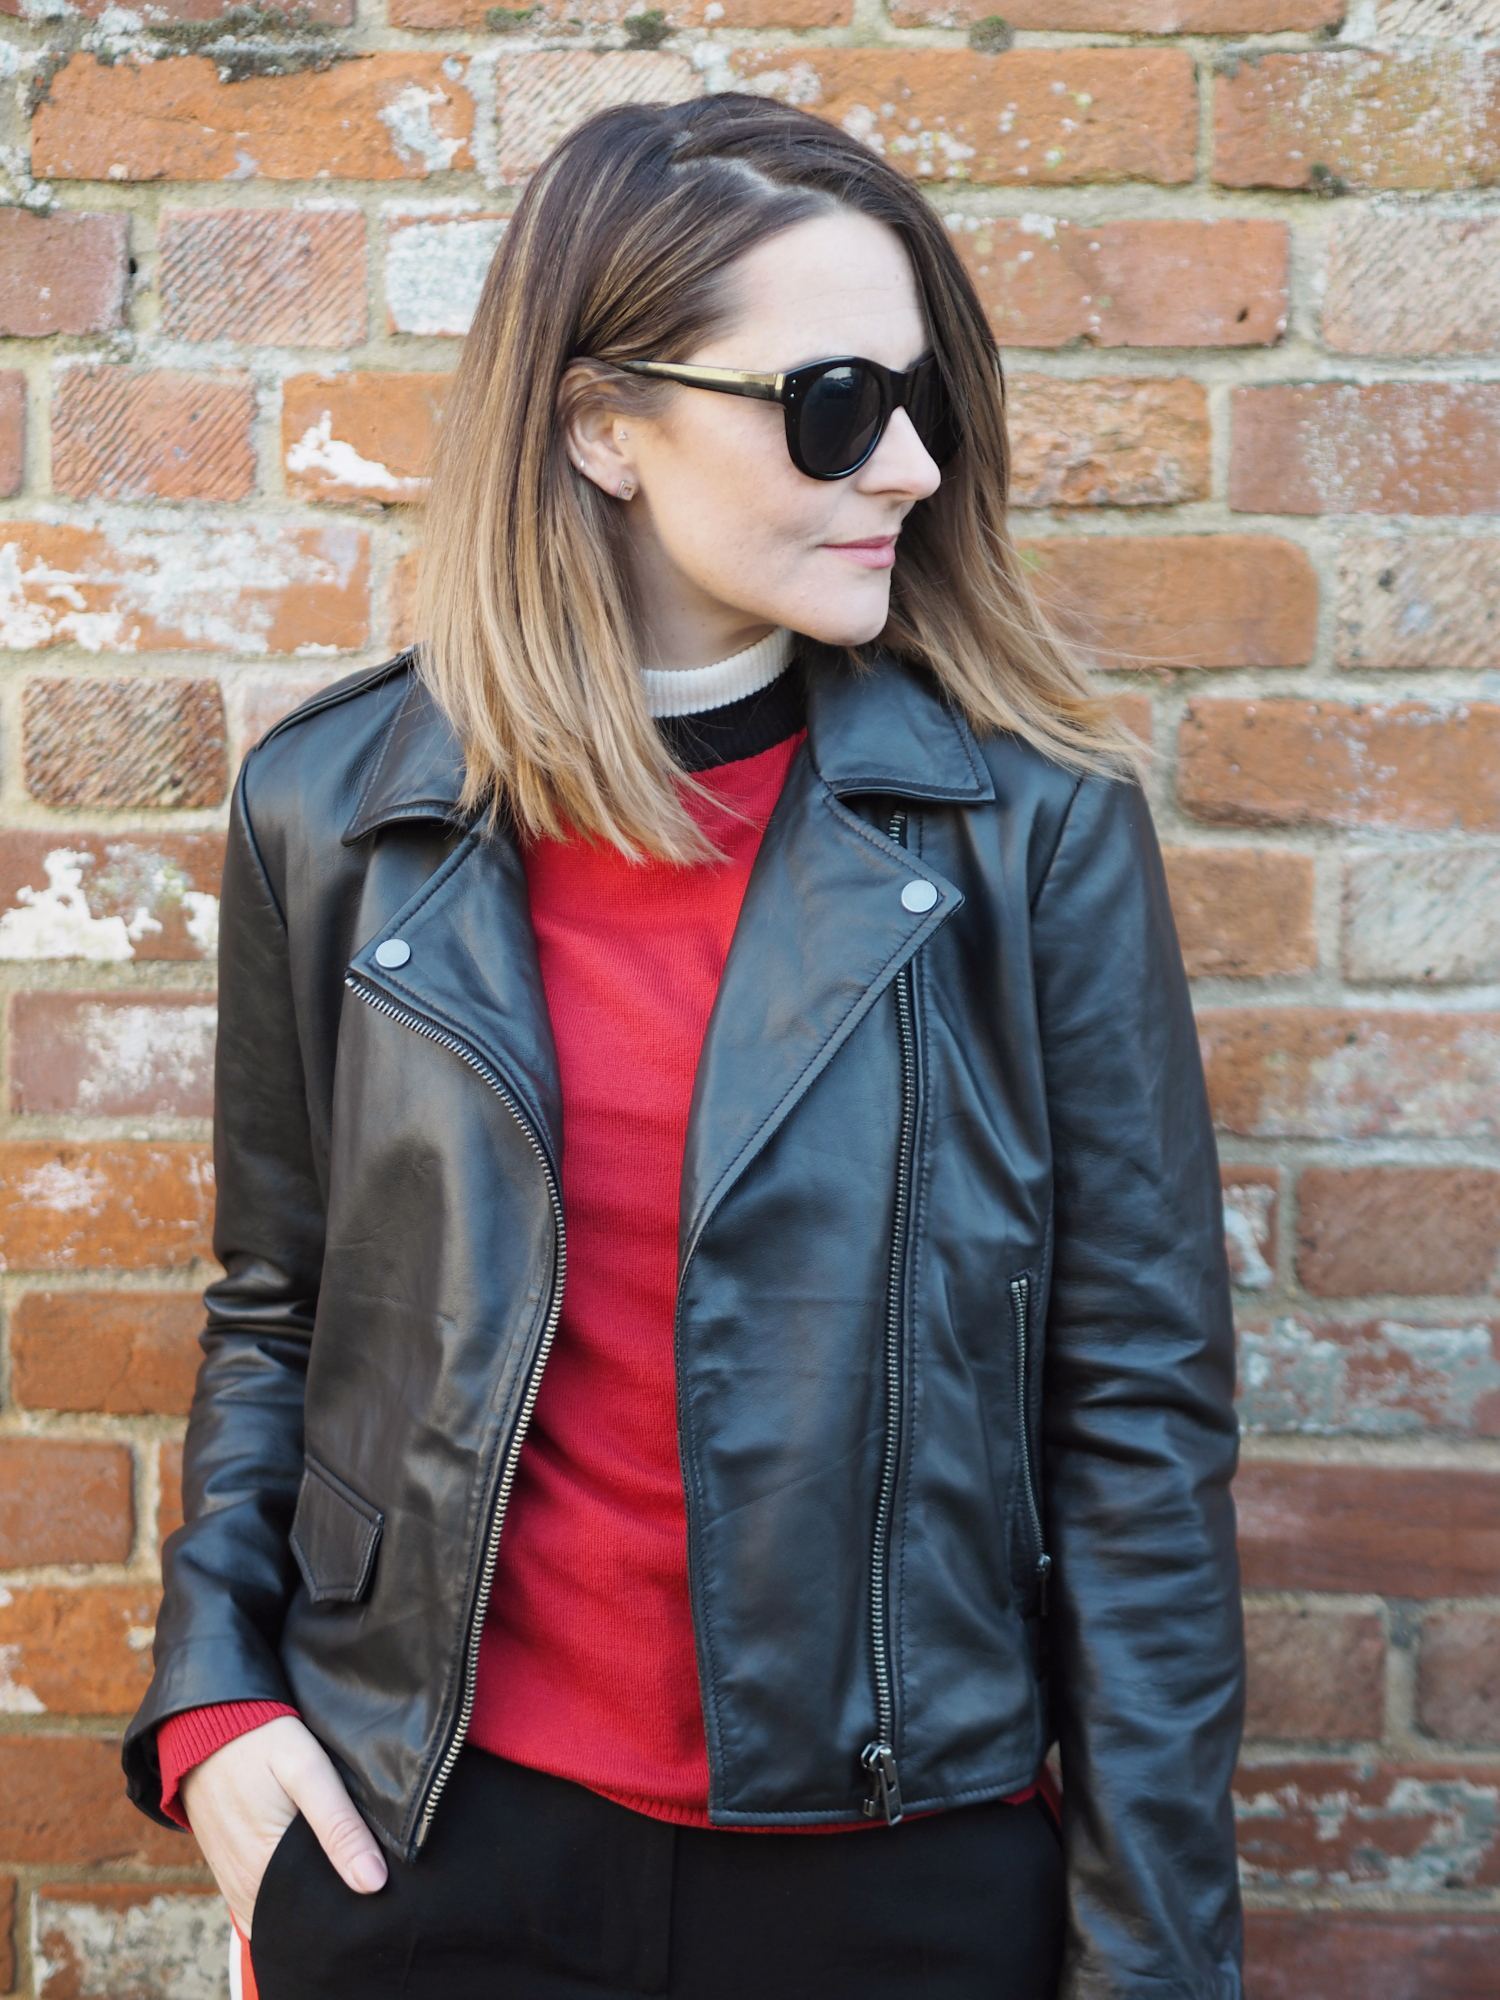 sporty striped outfit black biker jacket and red jumper